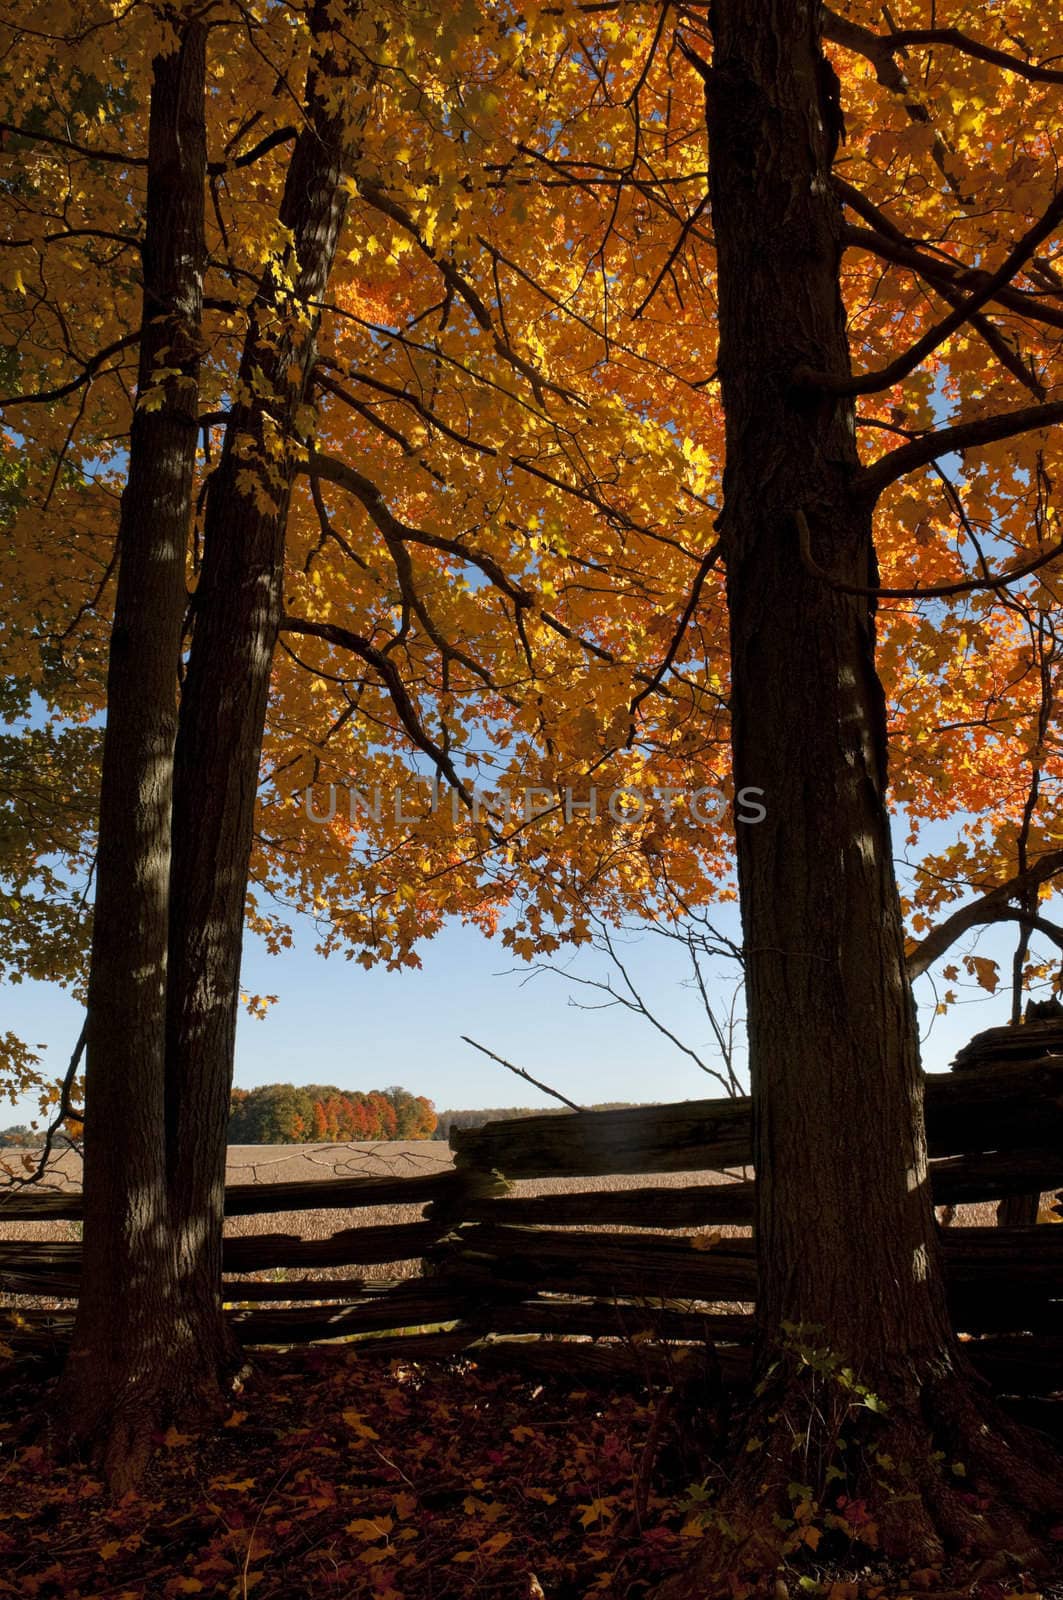 Autumn scenic with vibrant colors on the maple trees with wooden fence in the foreground